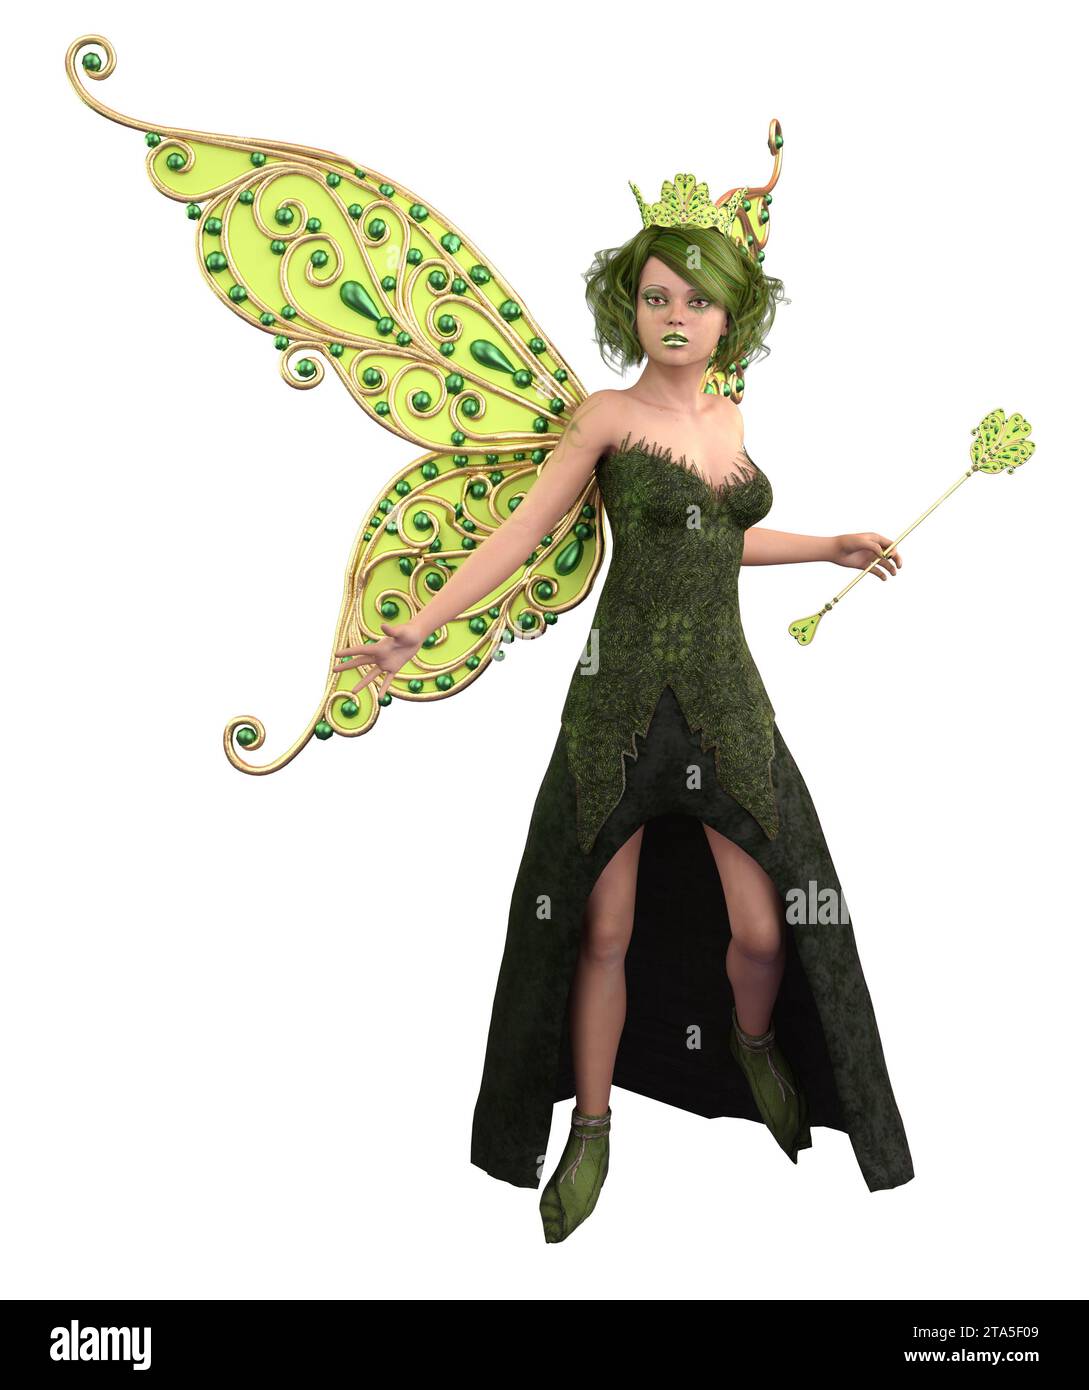 Fantasy fairy queen in green outfit with wings and crown, 3D Illustration. Stock Photo